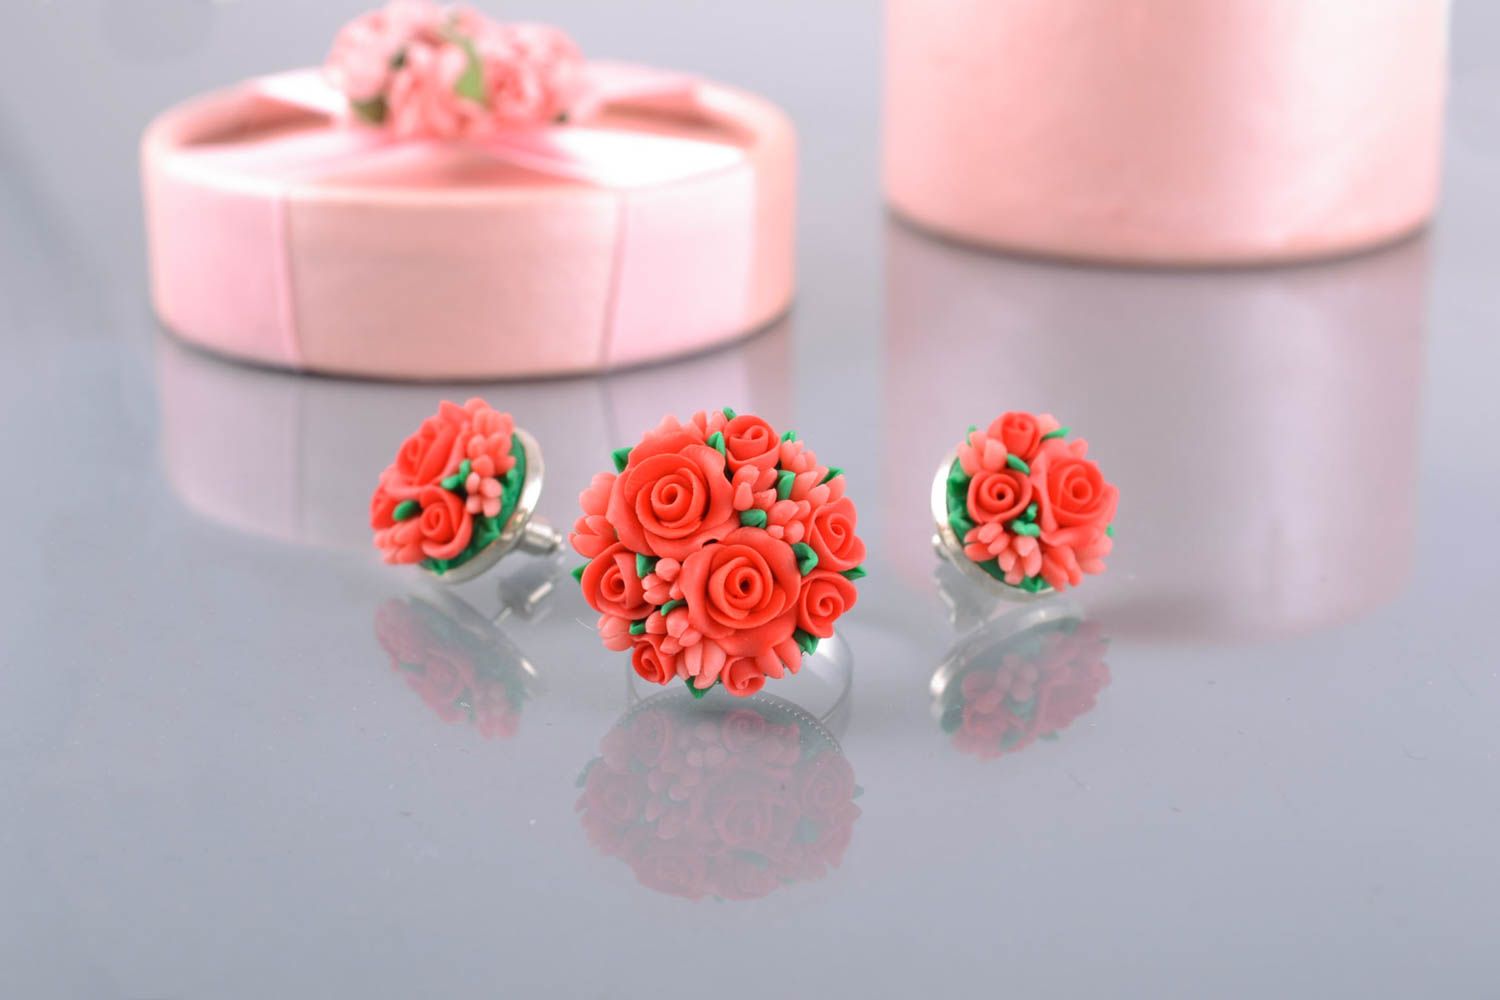 Handmade polymer clay floral jewelry set earrings and ring photo 1